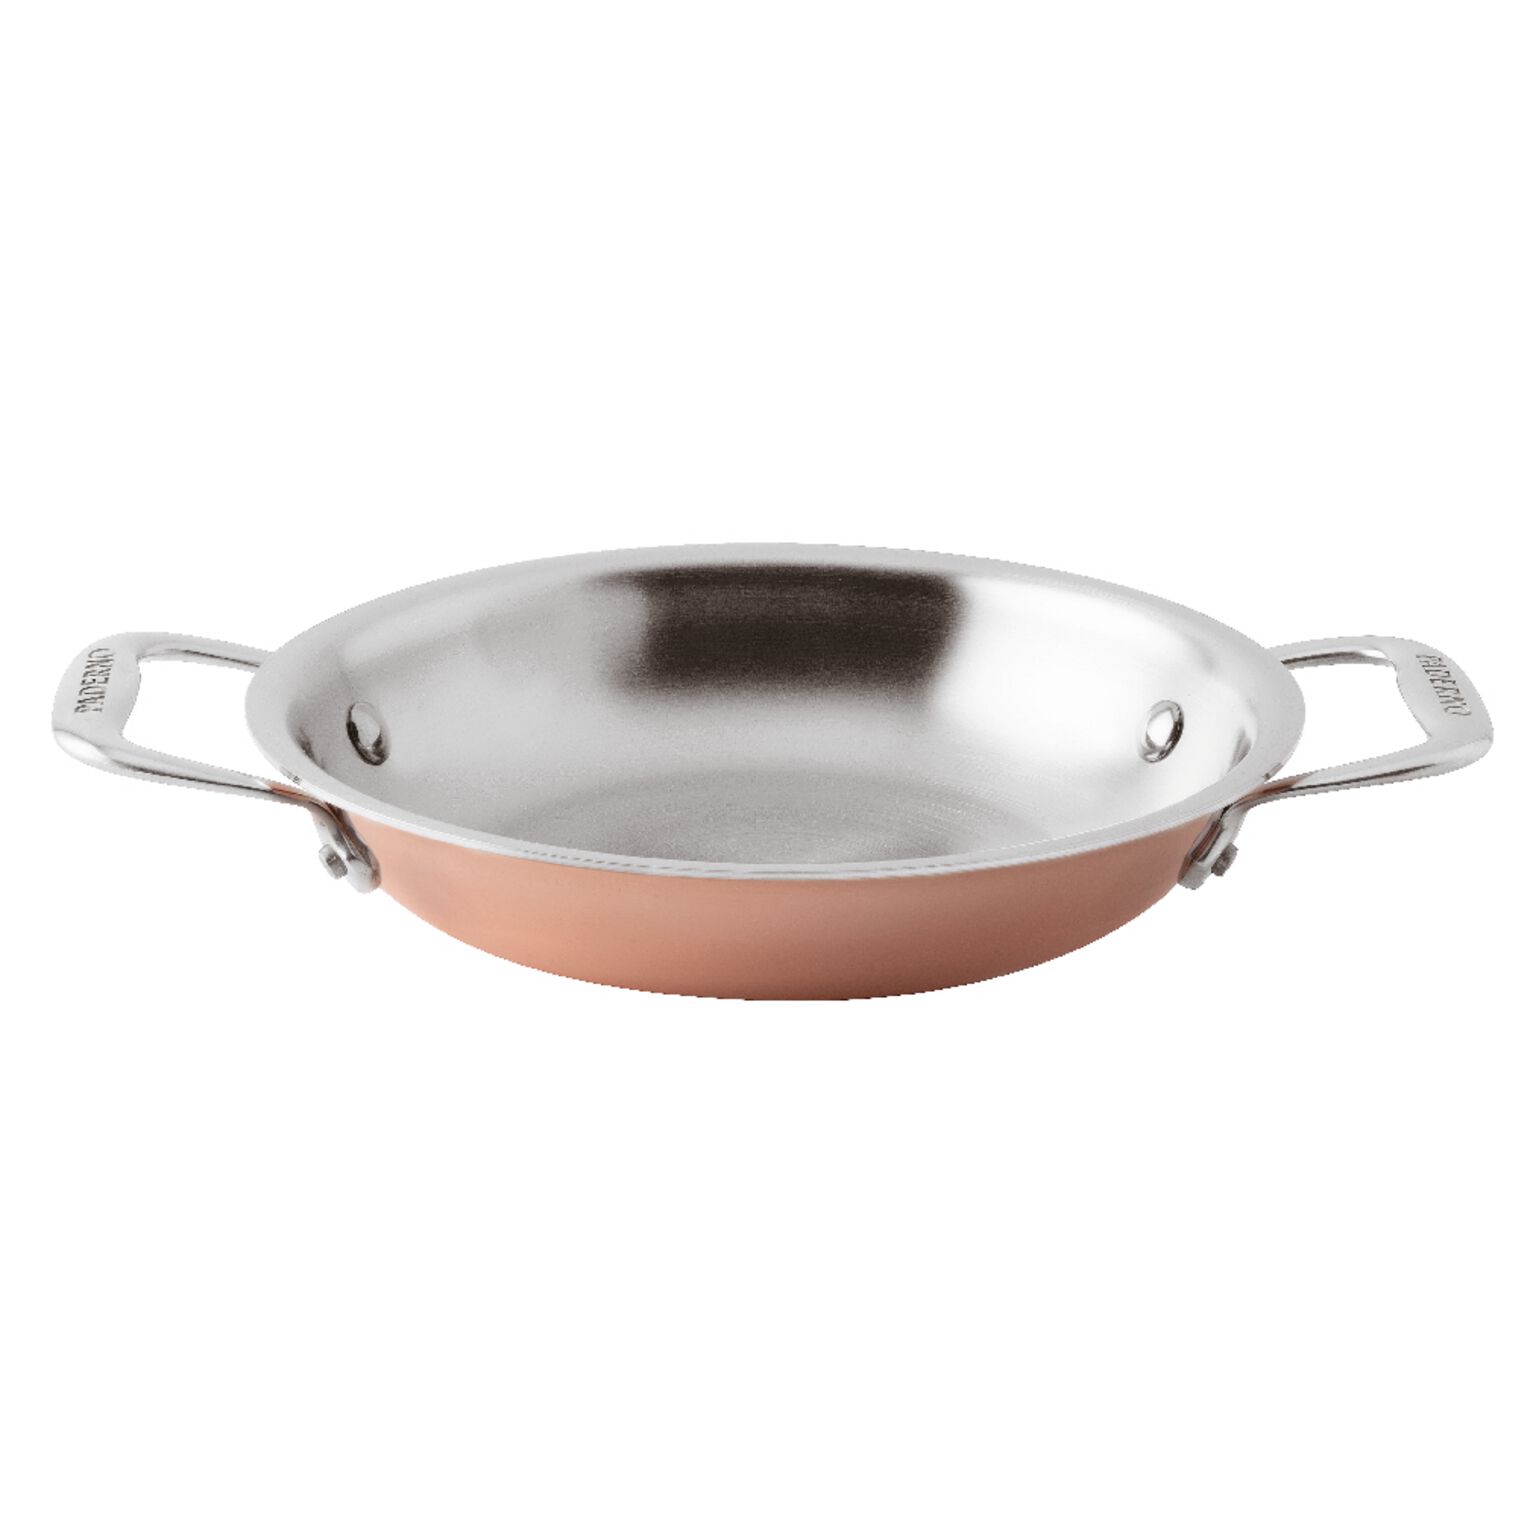 Paderno Online Store | High Quality Cookware and Kitchenware